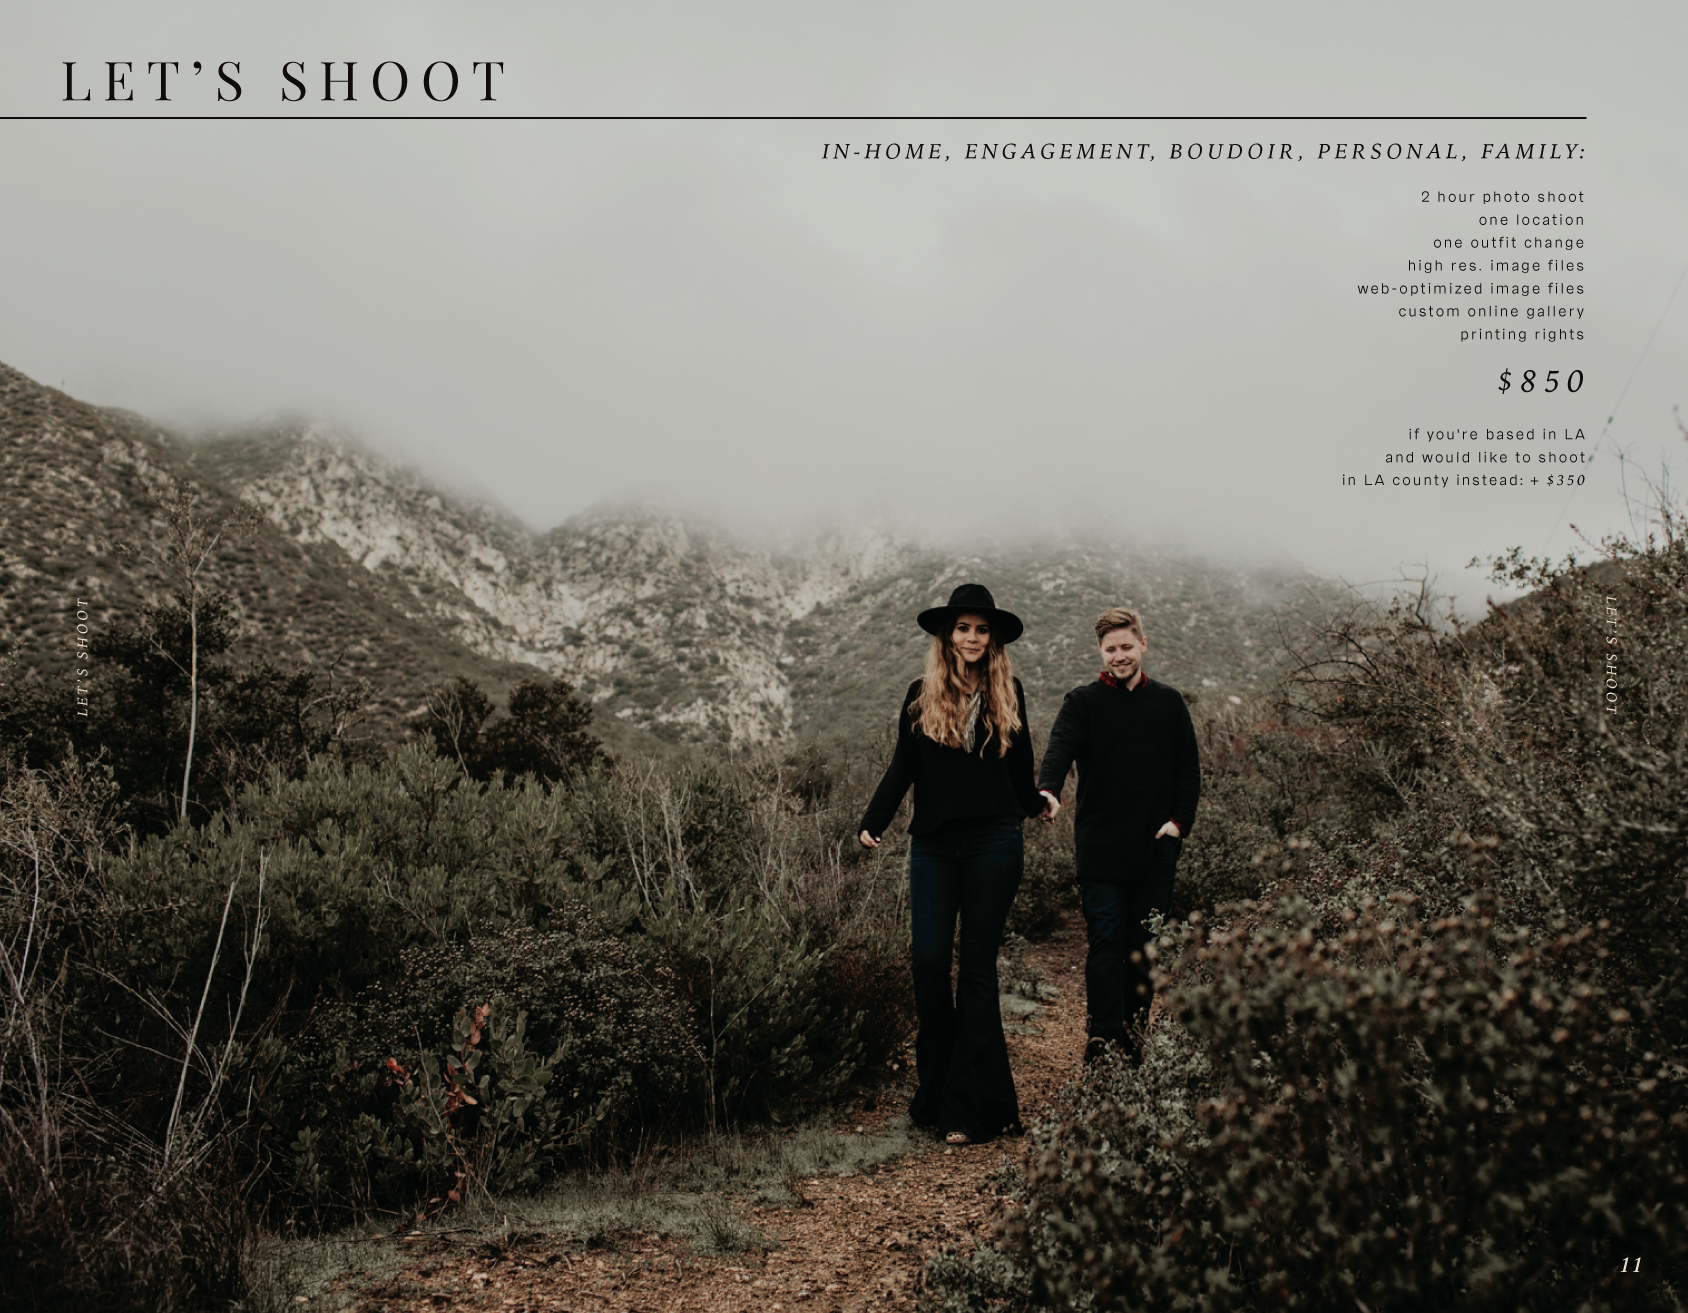 187-aimee-levy-photo-guide-4-shoots-11.png